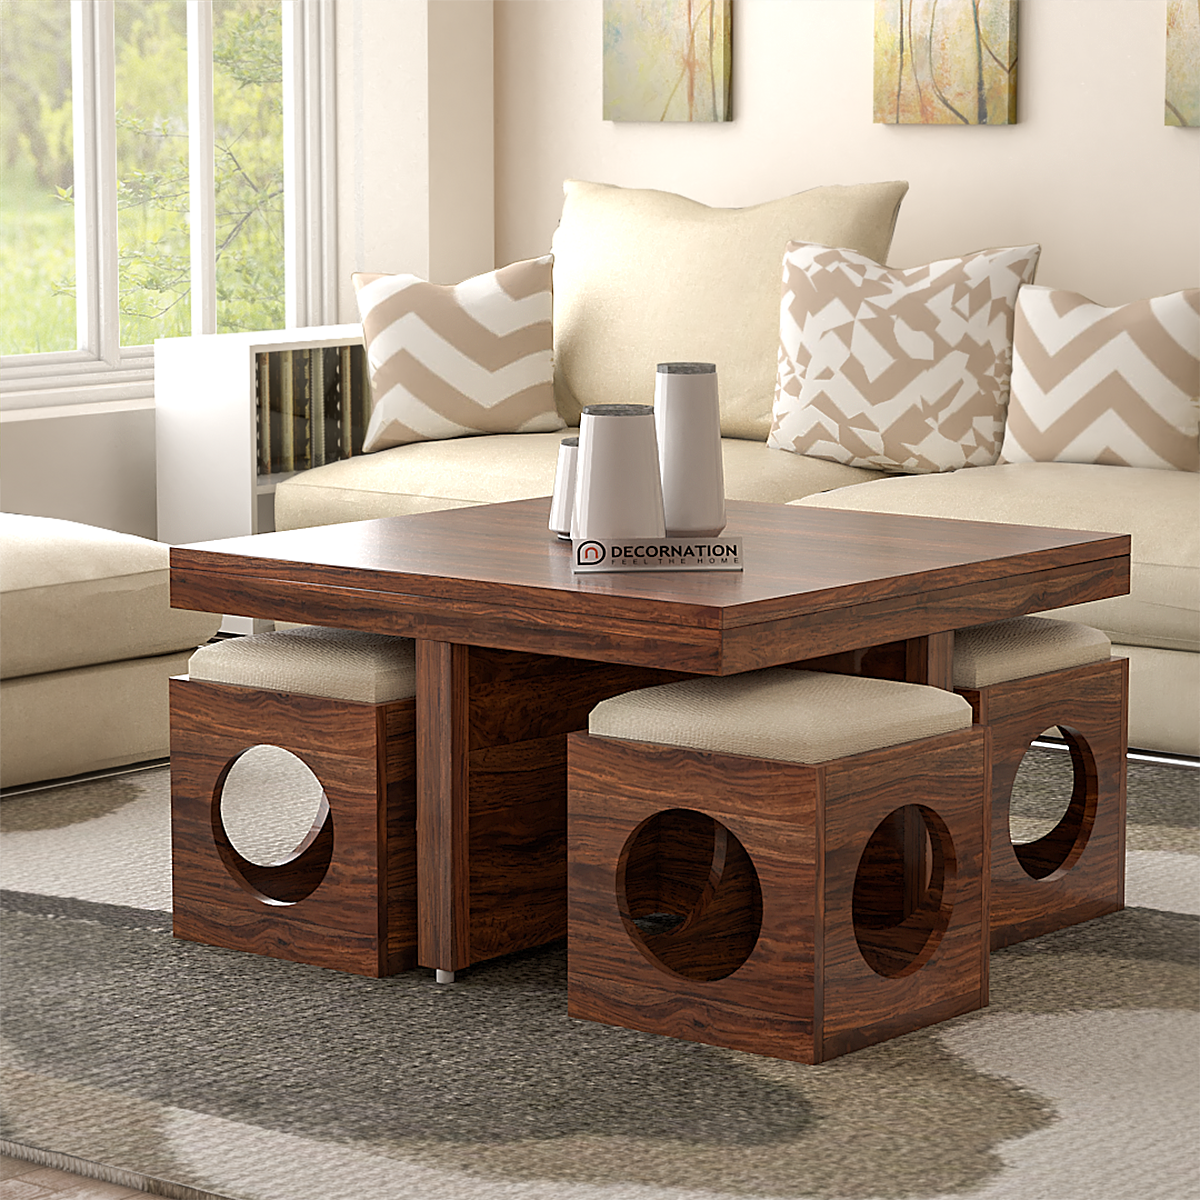 Belfast Wooden Coffee Table With 4 Stools – Brown